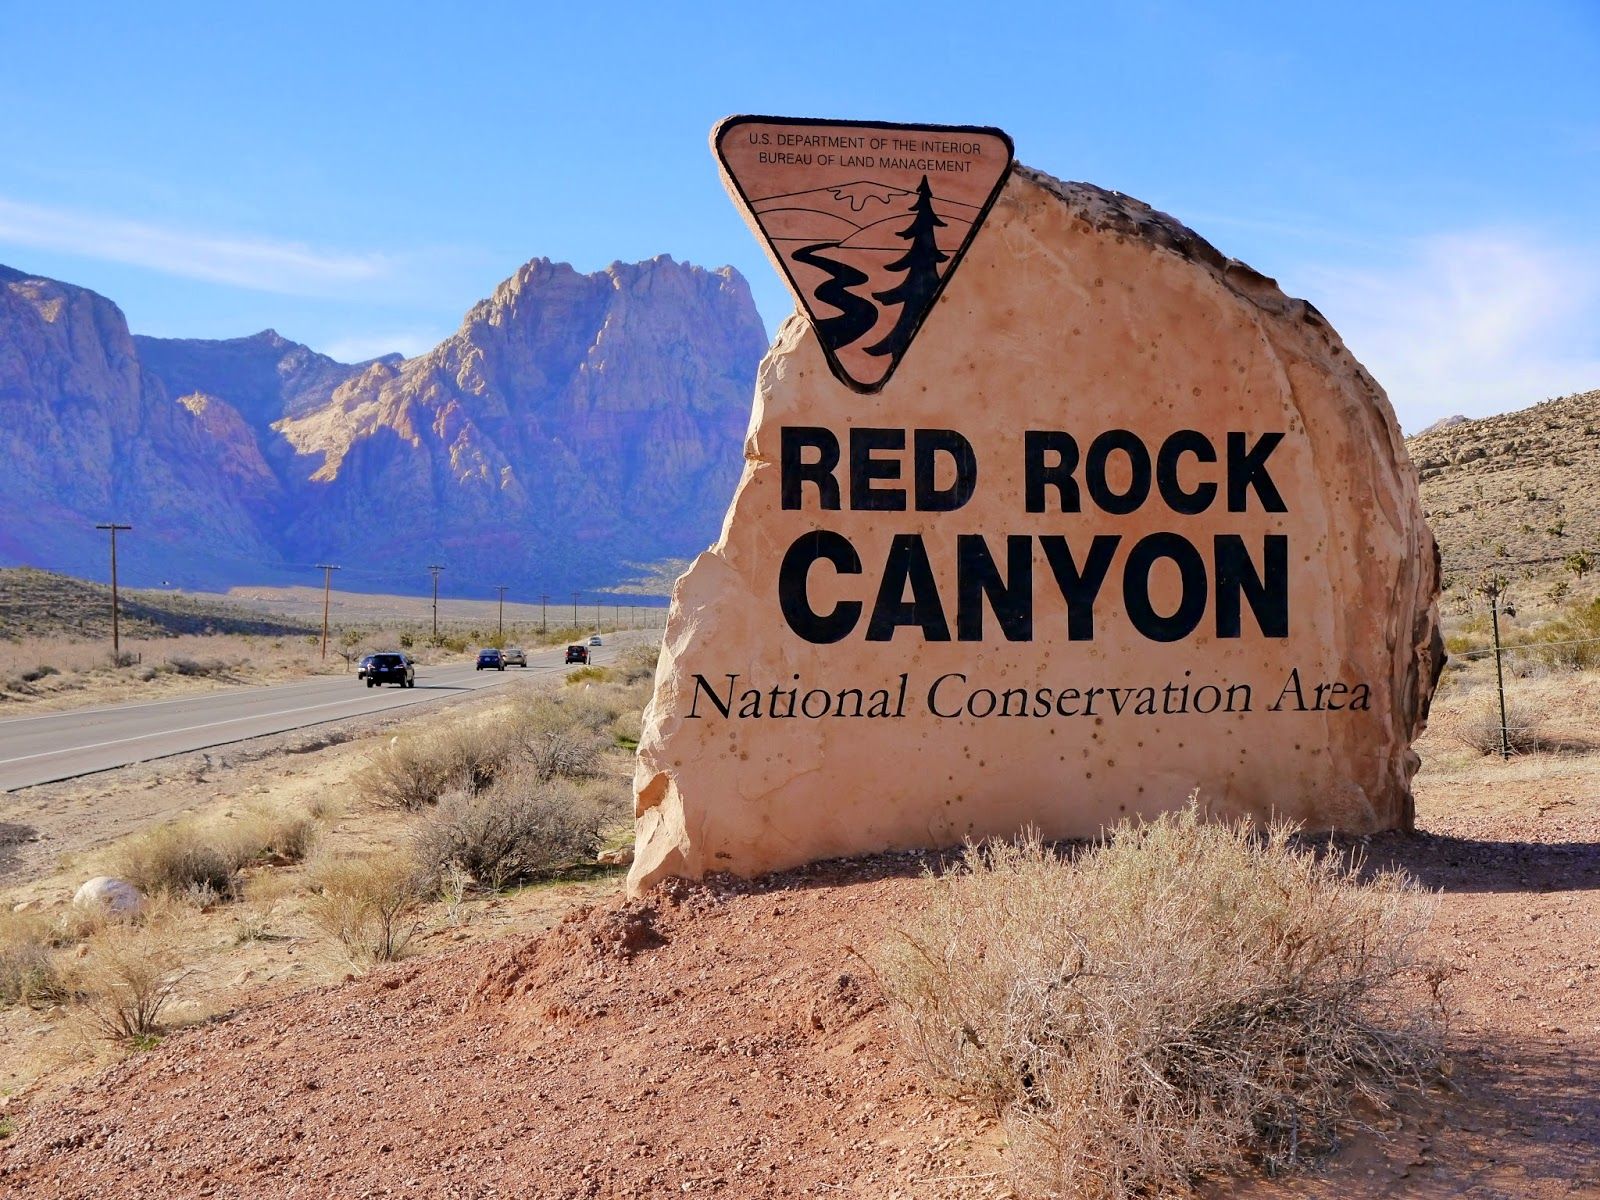 American Travel Journal: Red Rock Canyon National Conservation